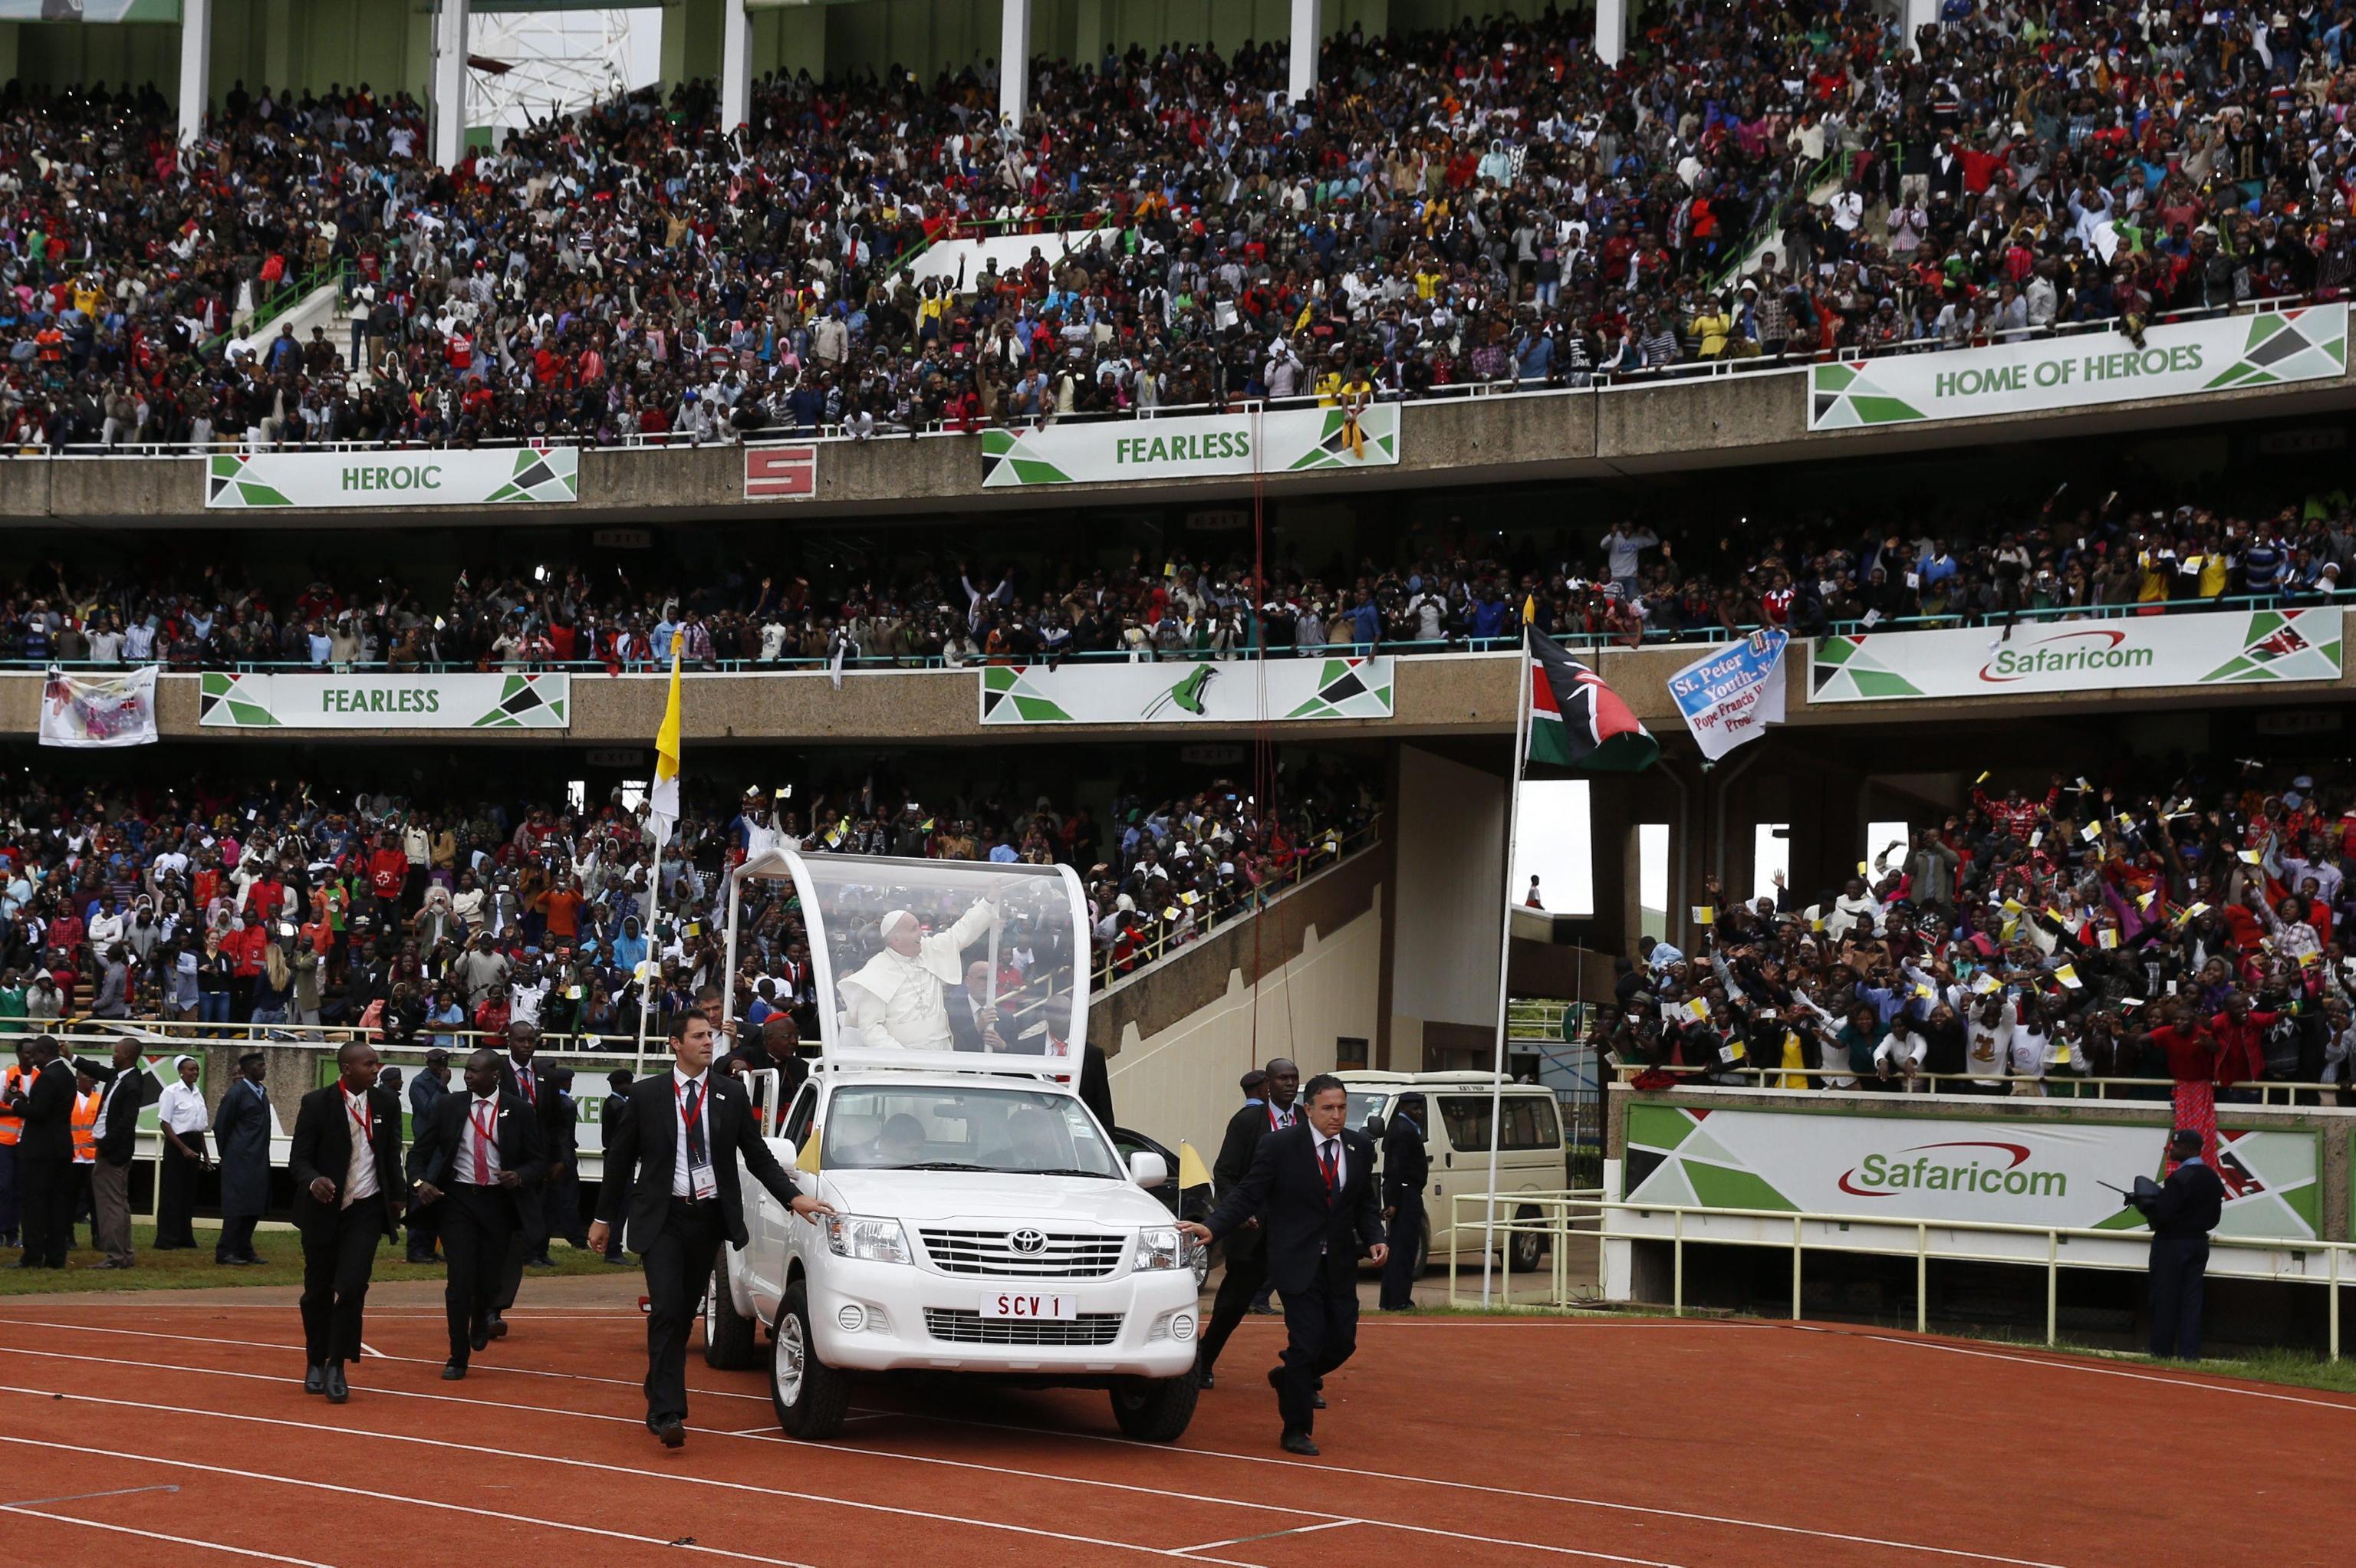 Pope Francis arrives for a meeting with youths at the Kasarani Stadium in Nairobi